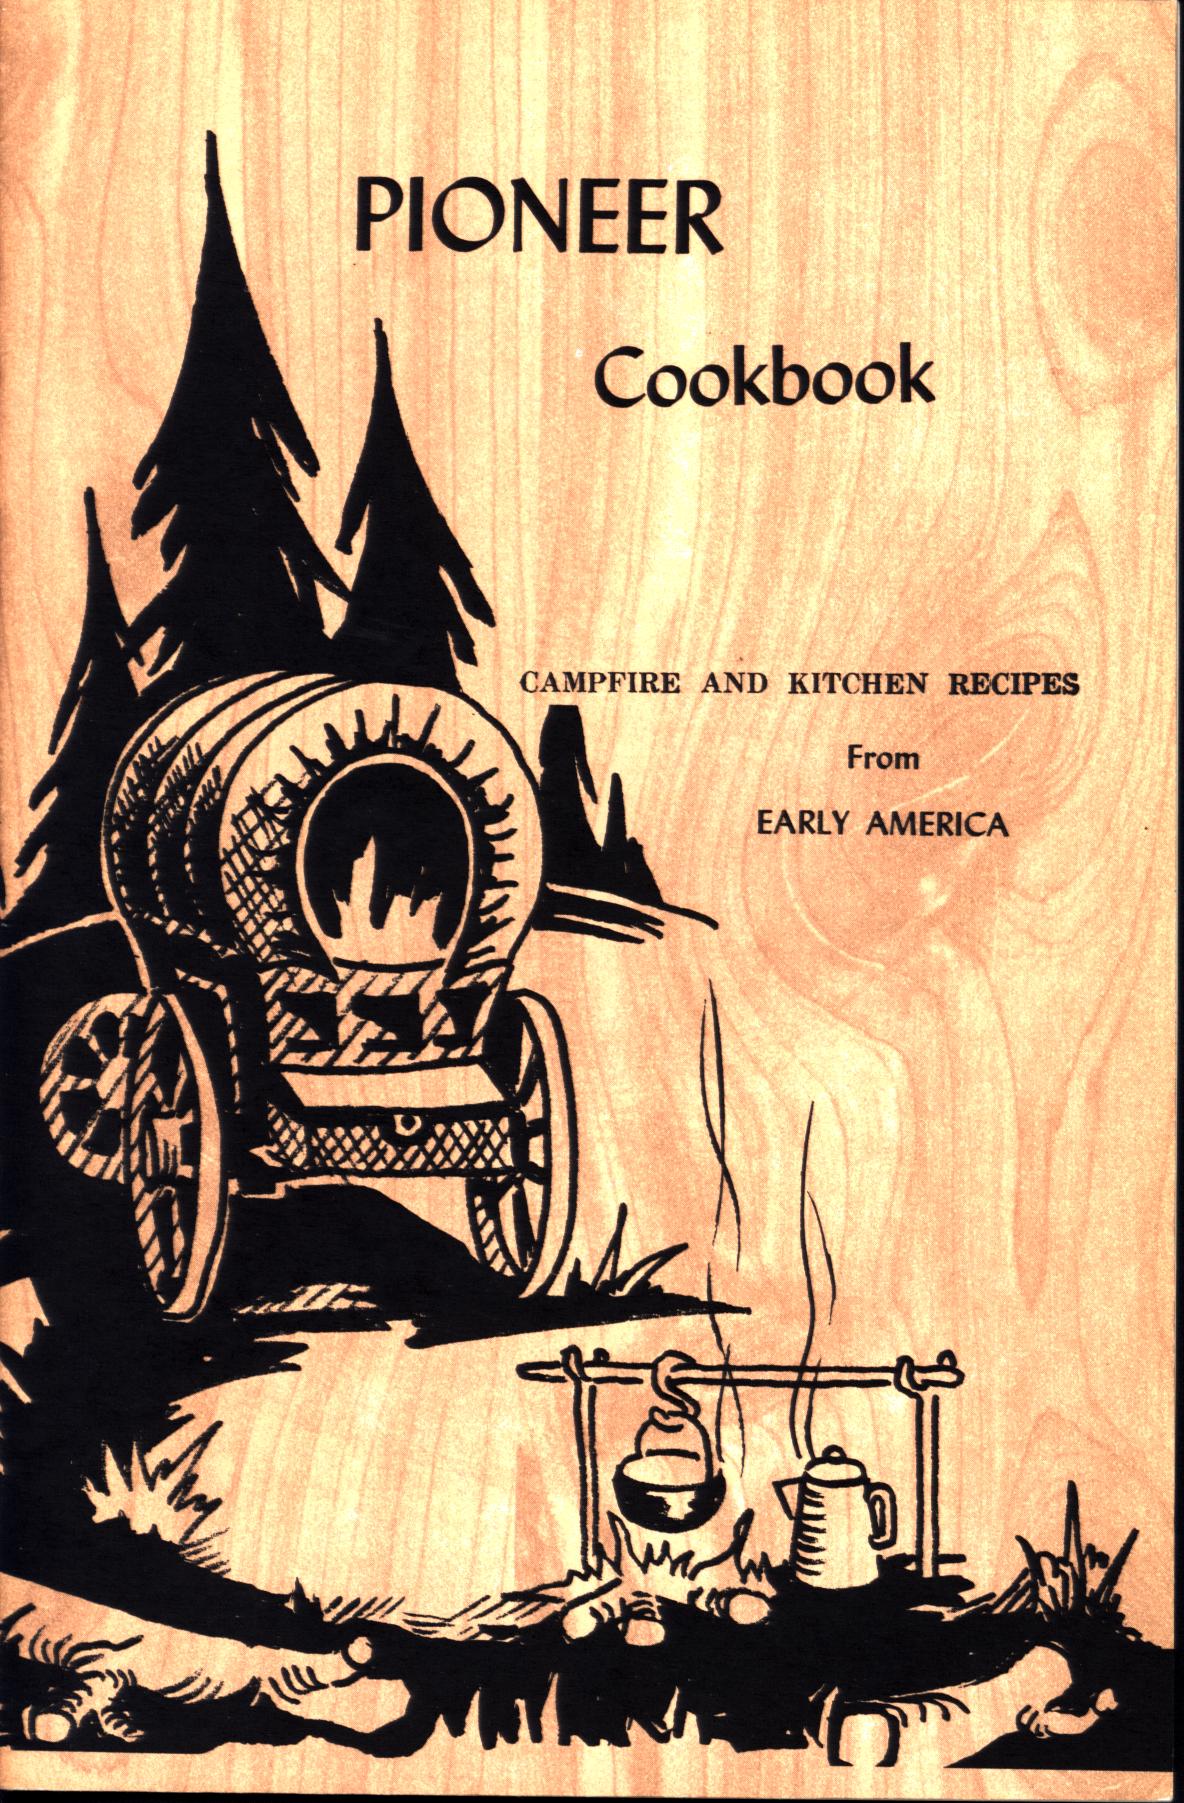 IONEER COOKBOOK: favorite campfire and kitchen recipes from early America. 